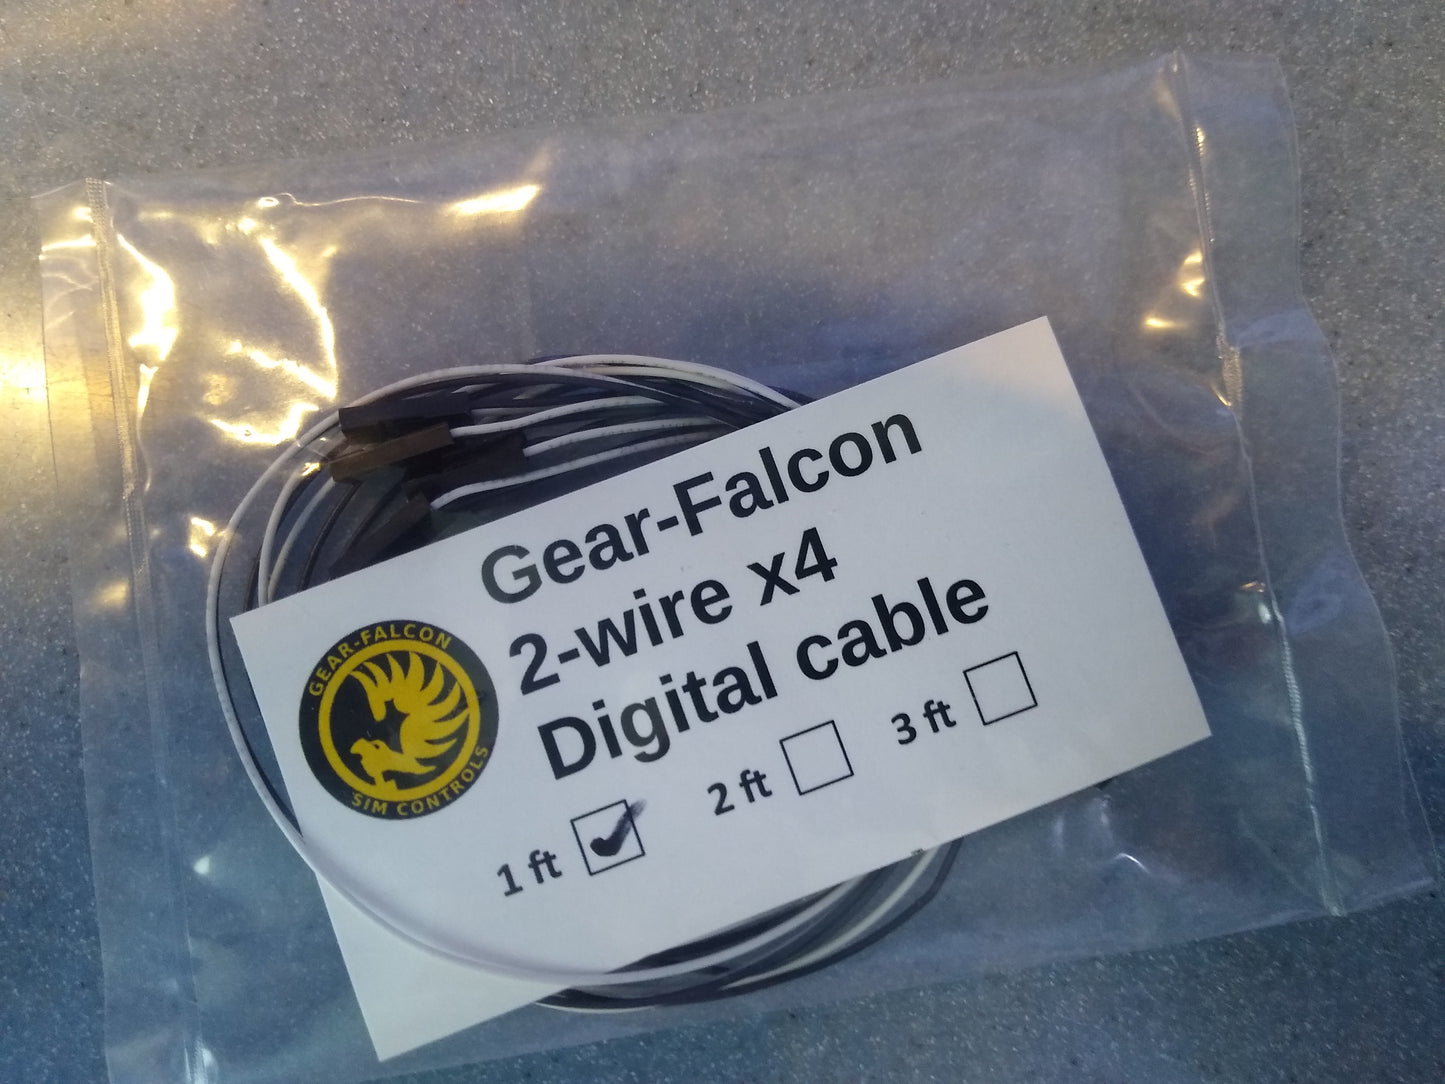 Cable sets for Joystick controllers